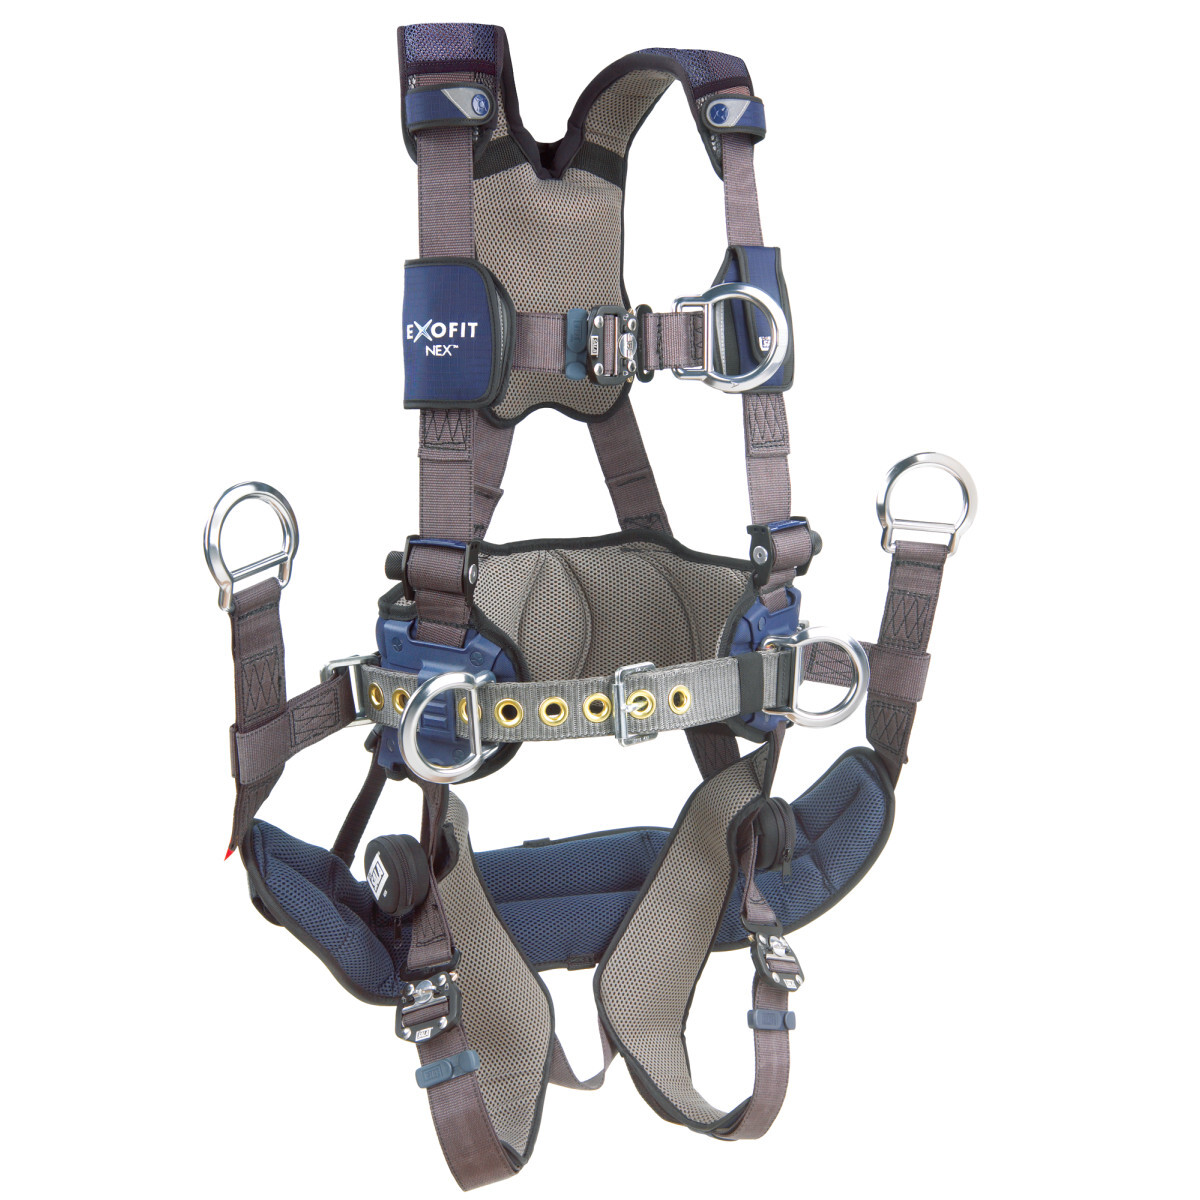 3M™ DBI-SALA® Medium ExoFit NEX™ Full Body/Vest Style Harness With Tech-Lite™ Aluminum Back And Front D-Ring, Duo-Lok™ Quick Con